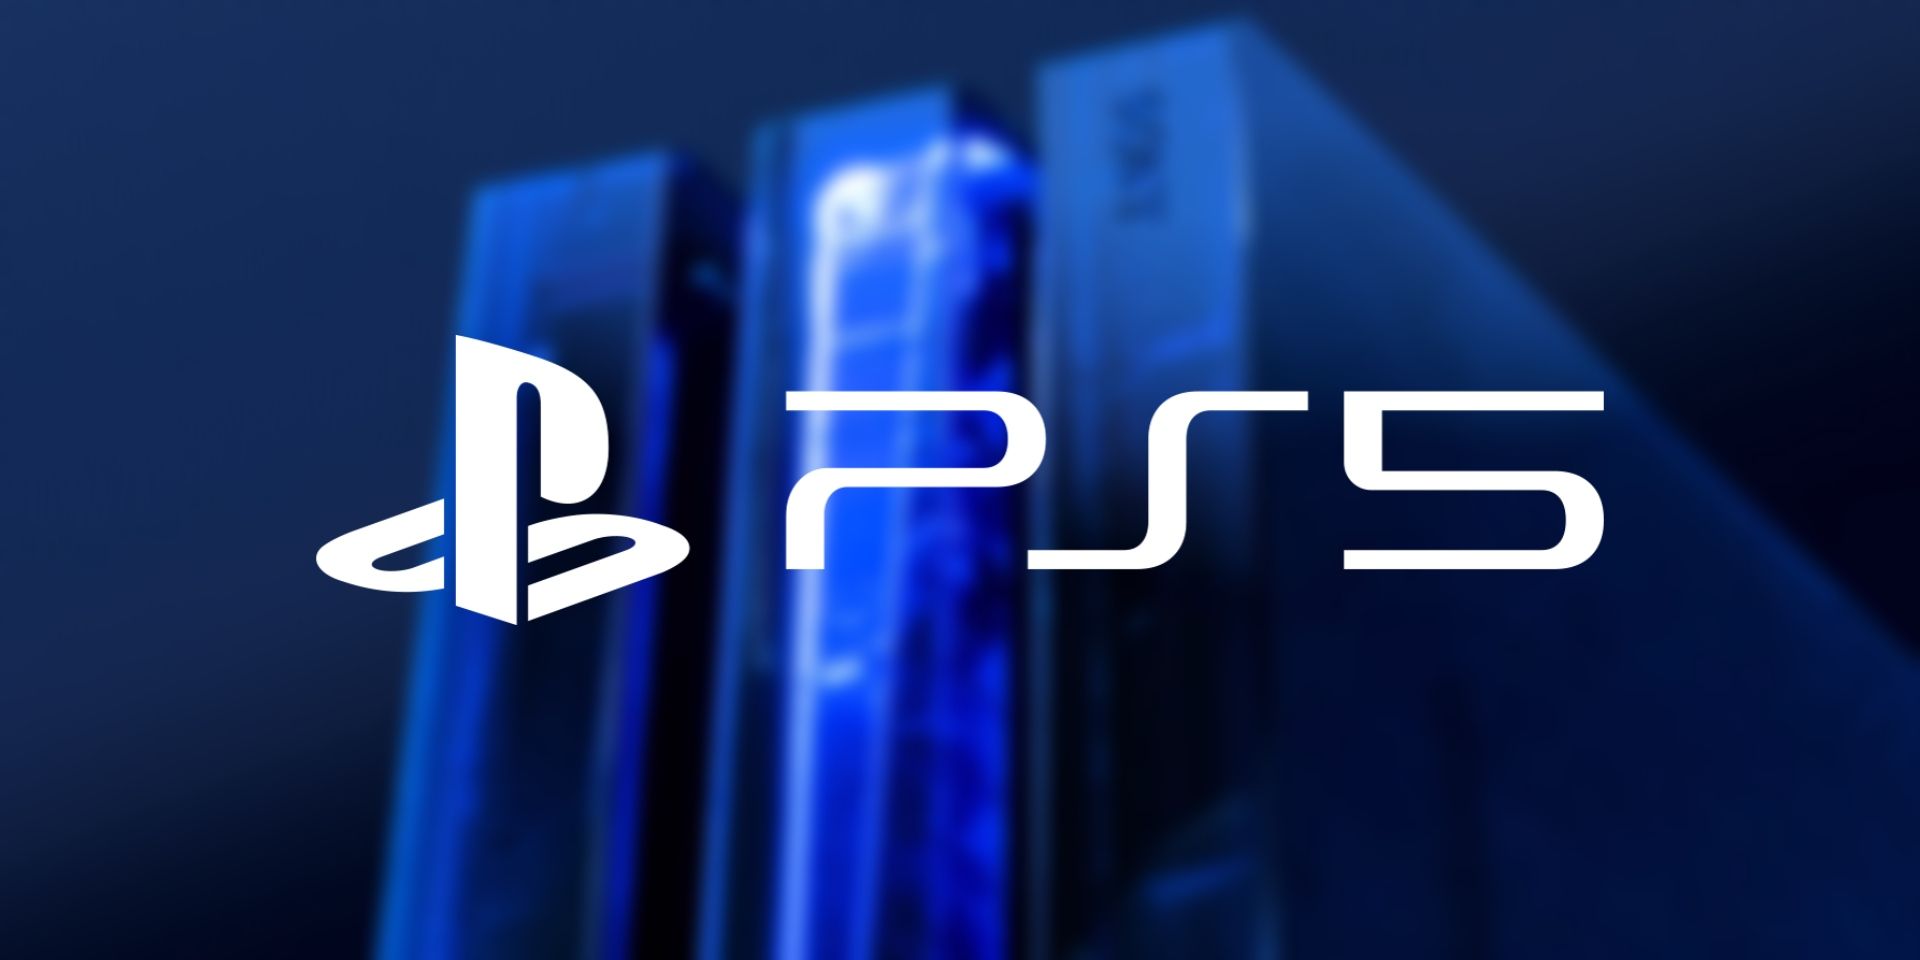 What Will Be The Price Of PS5